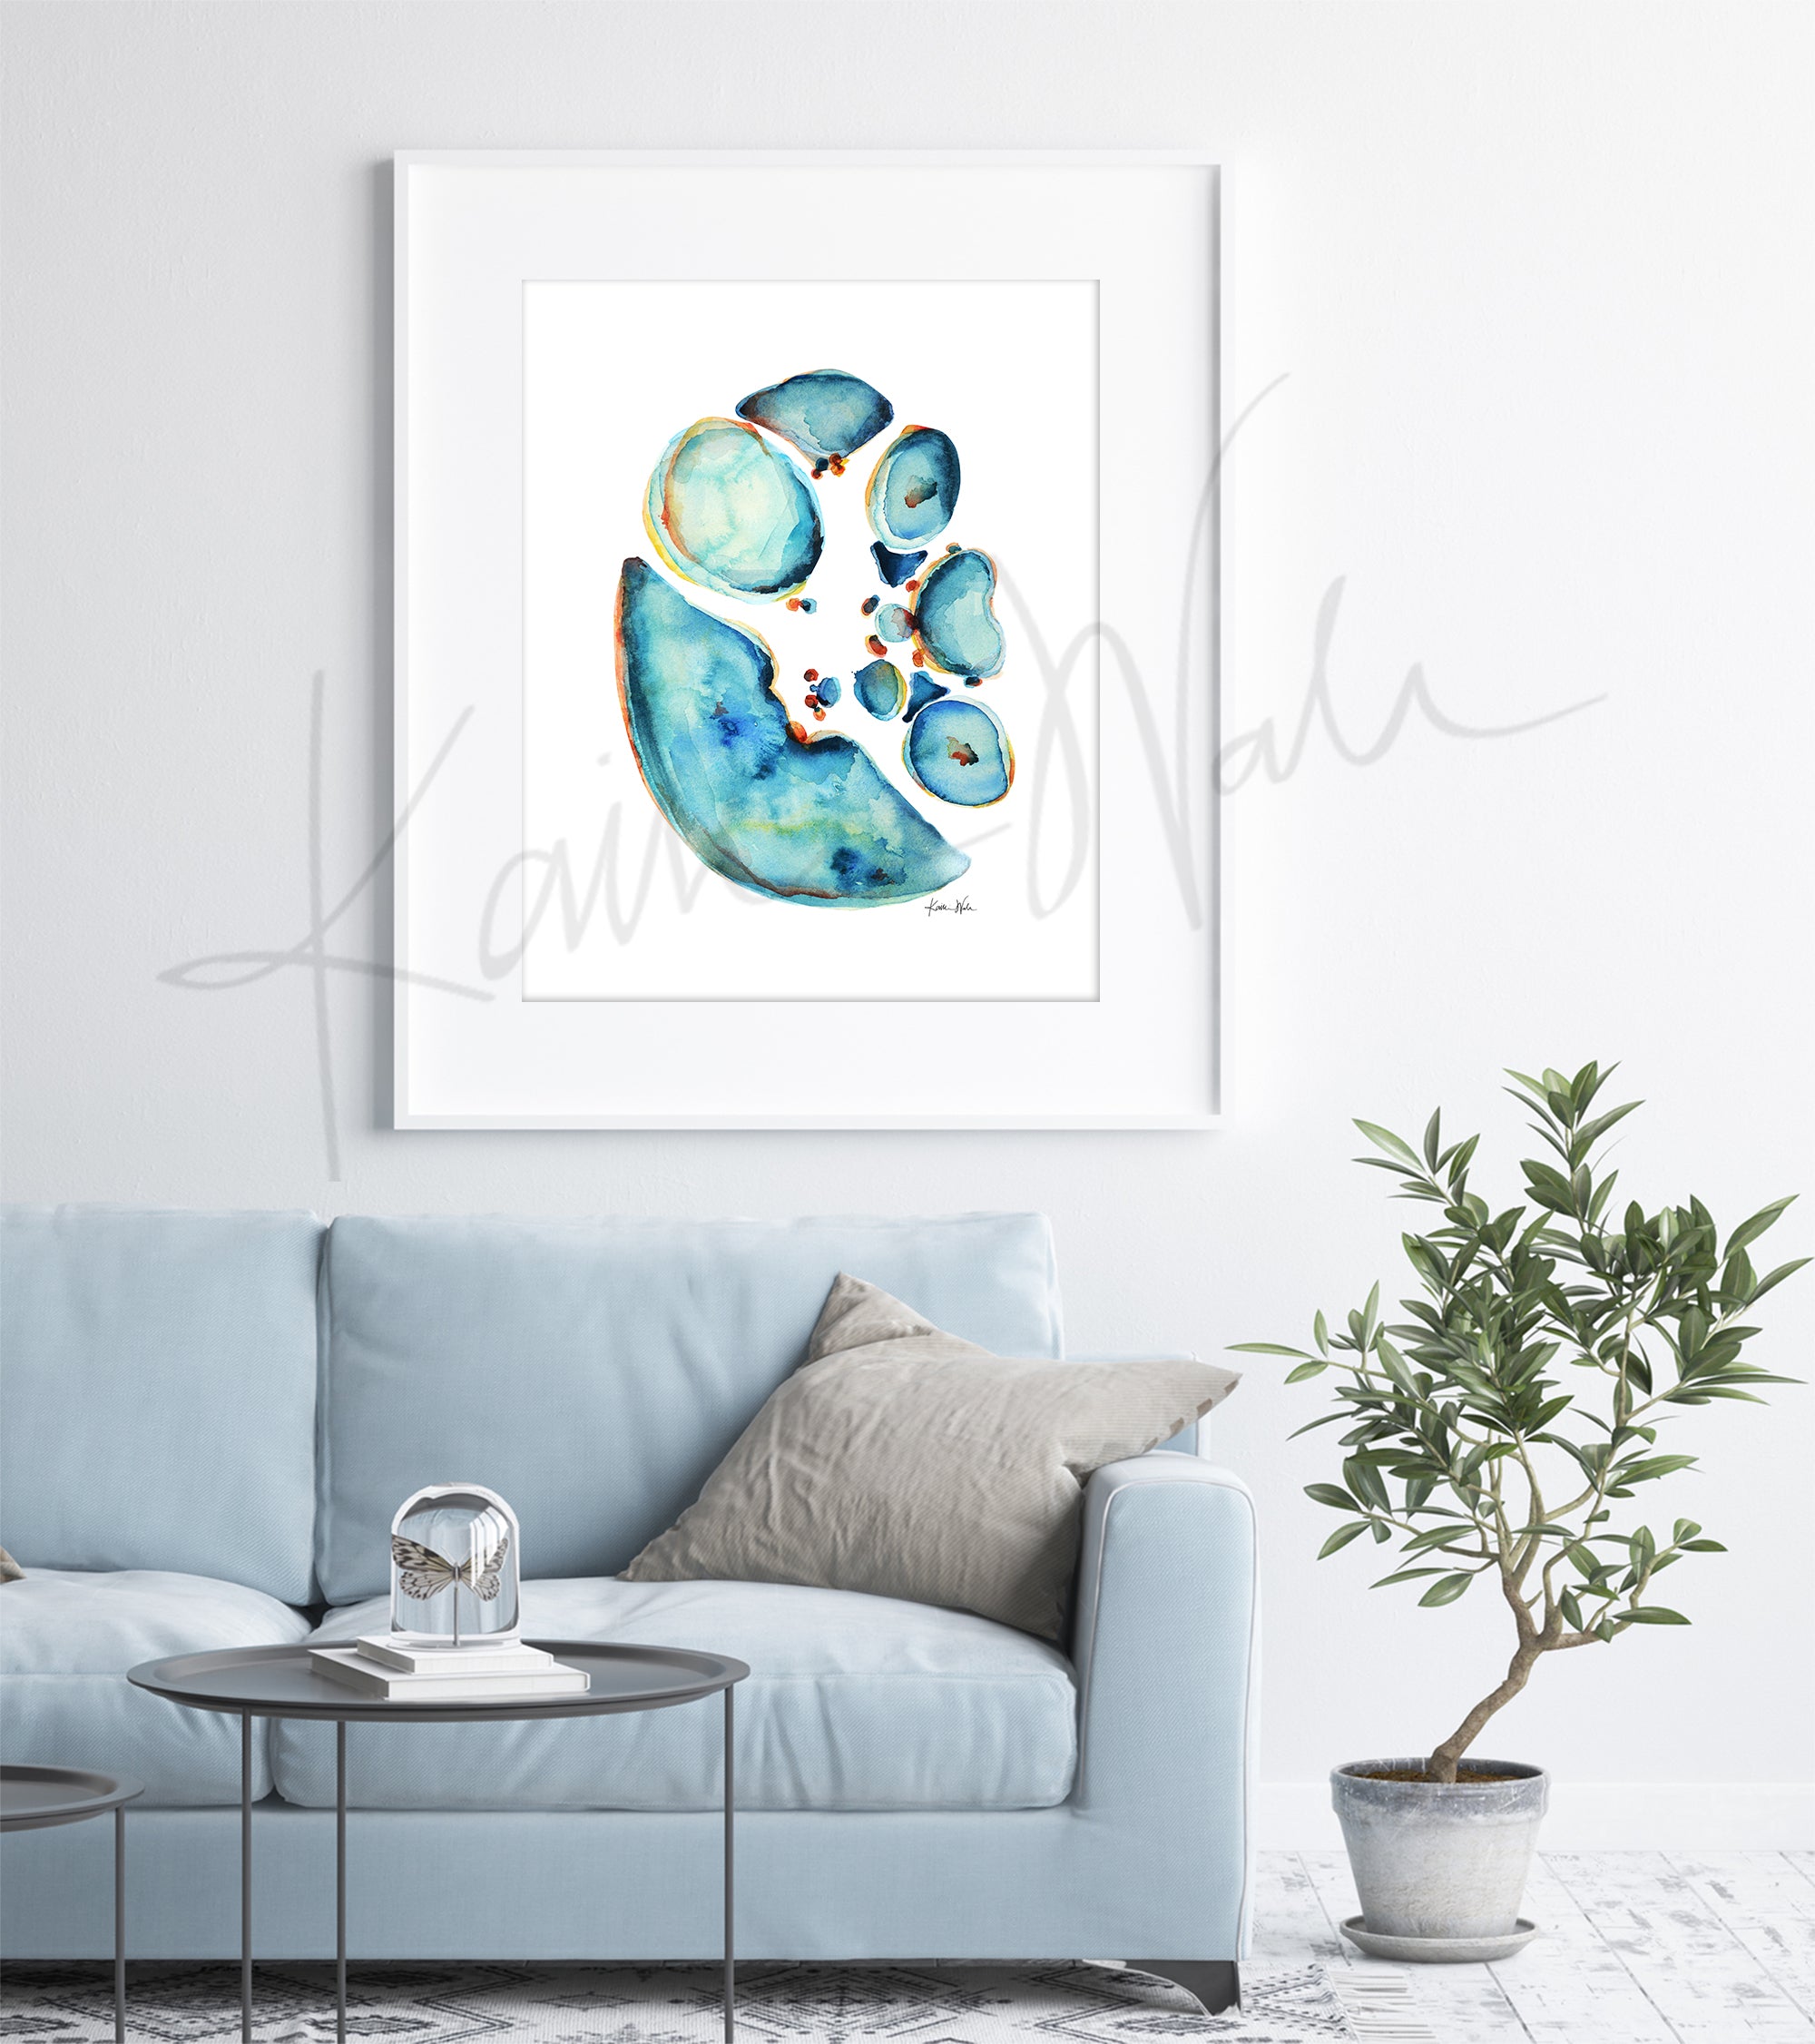 Framed watercolor painting showing a cross section of an abdomen in blues and teals with pops of orange and yellow. The painting hangs above a blue couch.